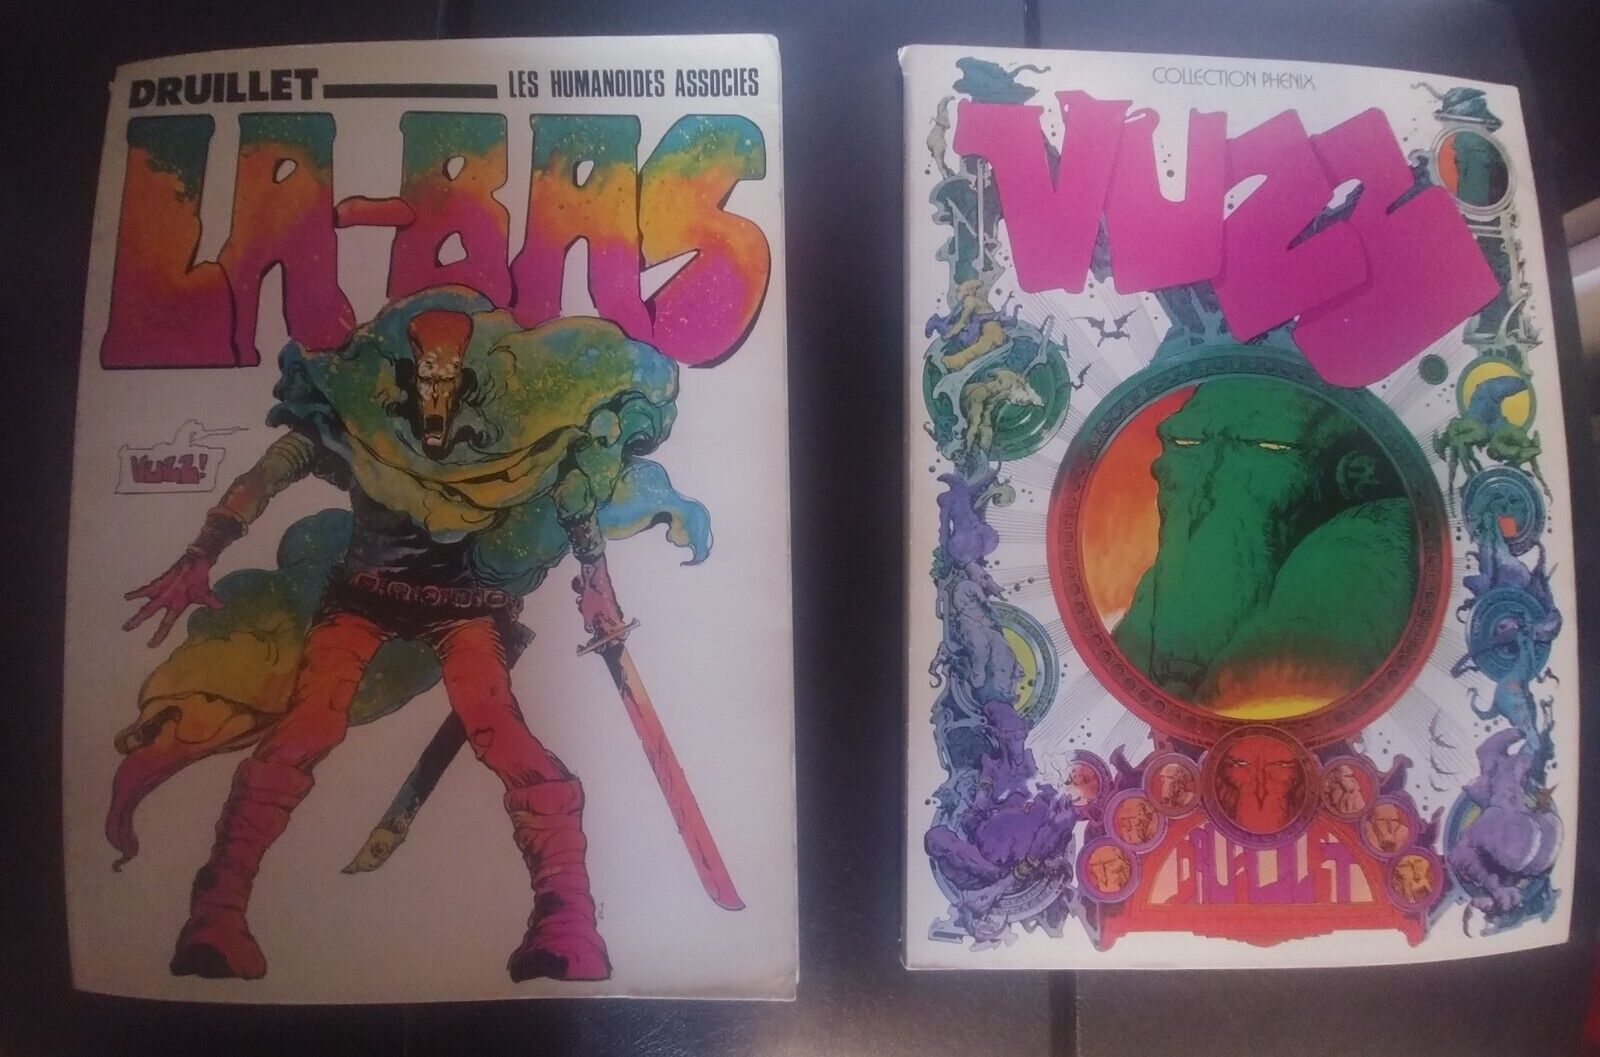 VUZZ TWO BOOKS BY PHILIPPE DRUILLET